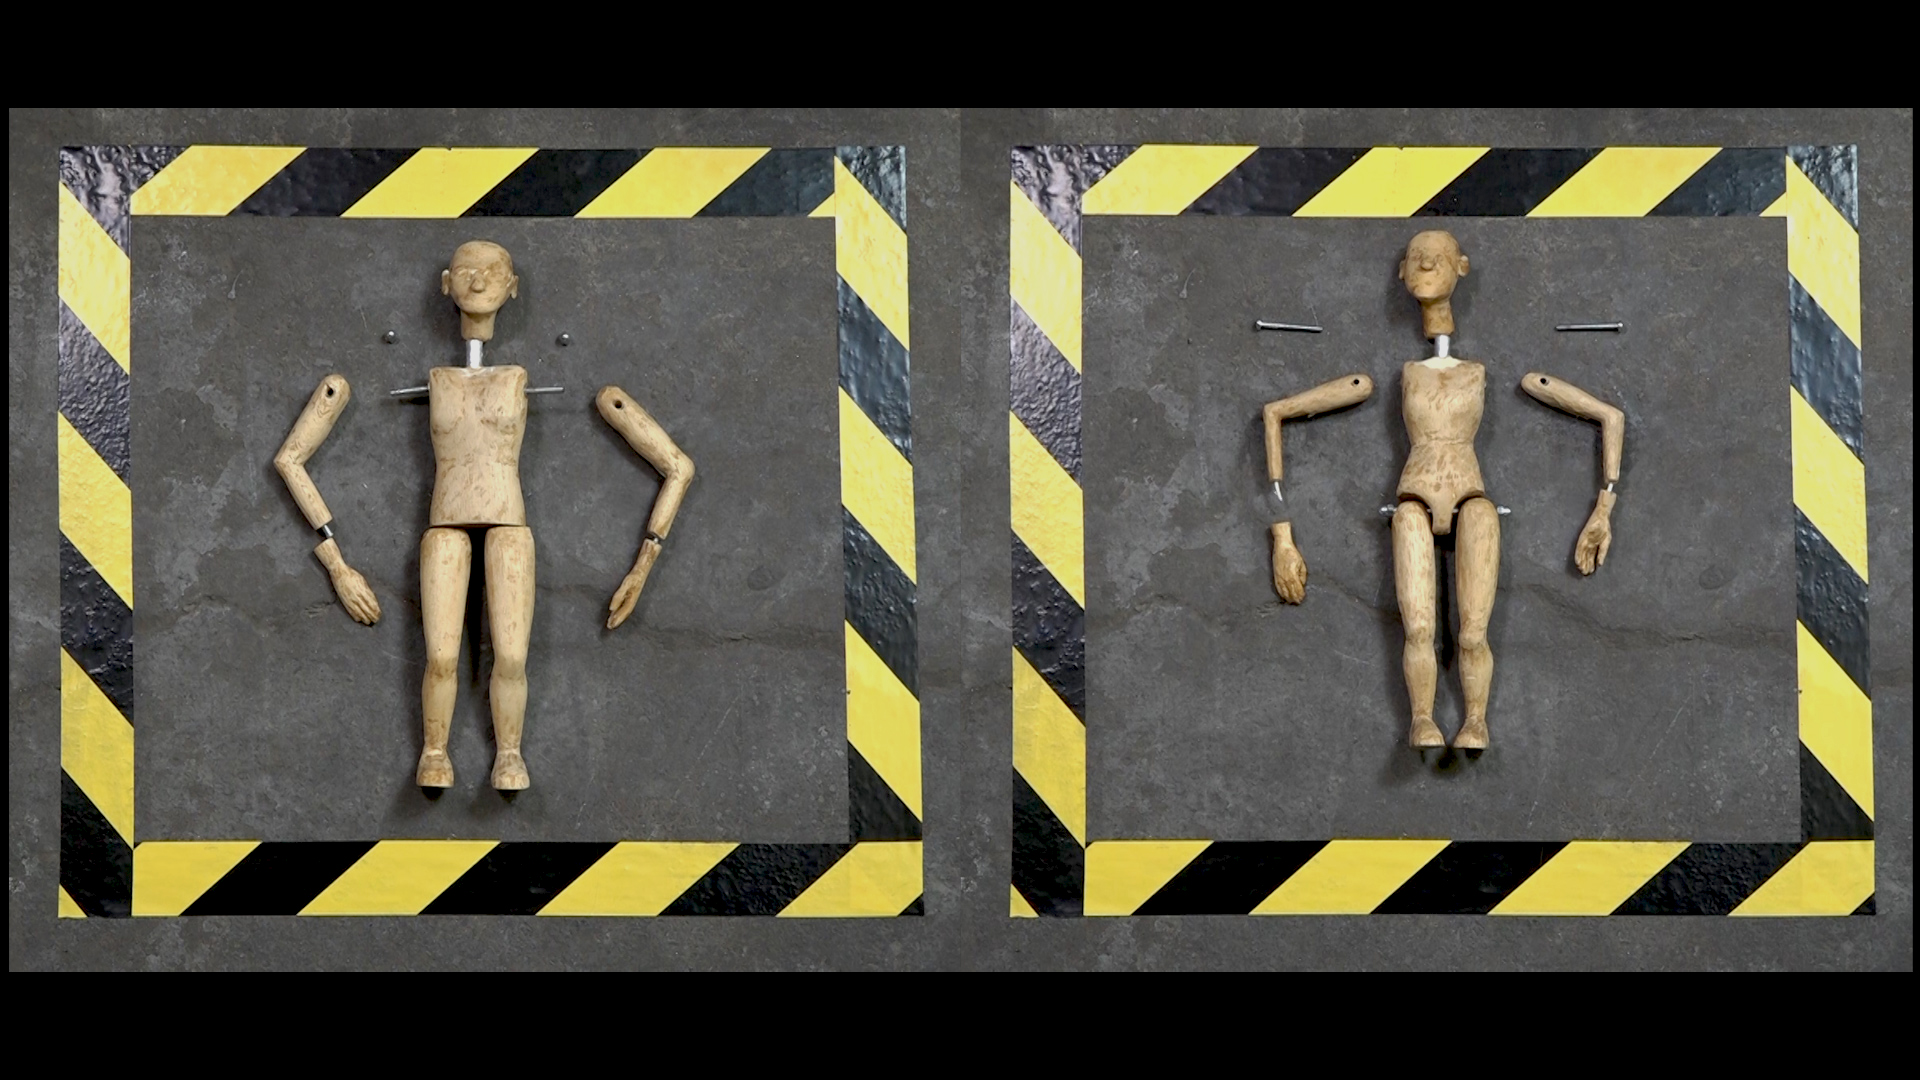 Two wooden puppets with limbs taken apart, surrounded by black and yellow tape